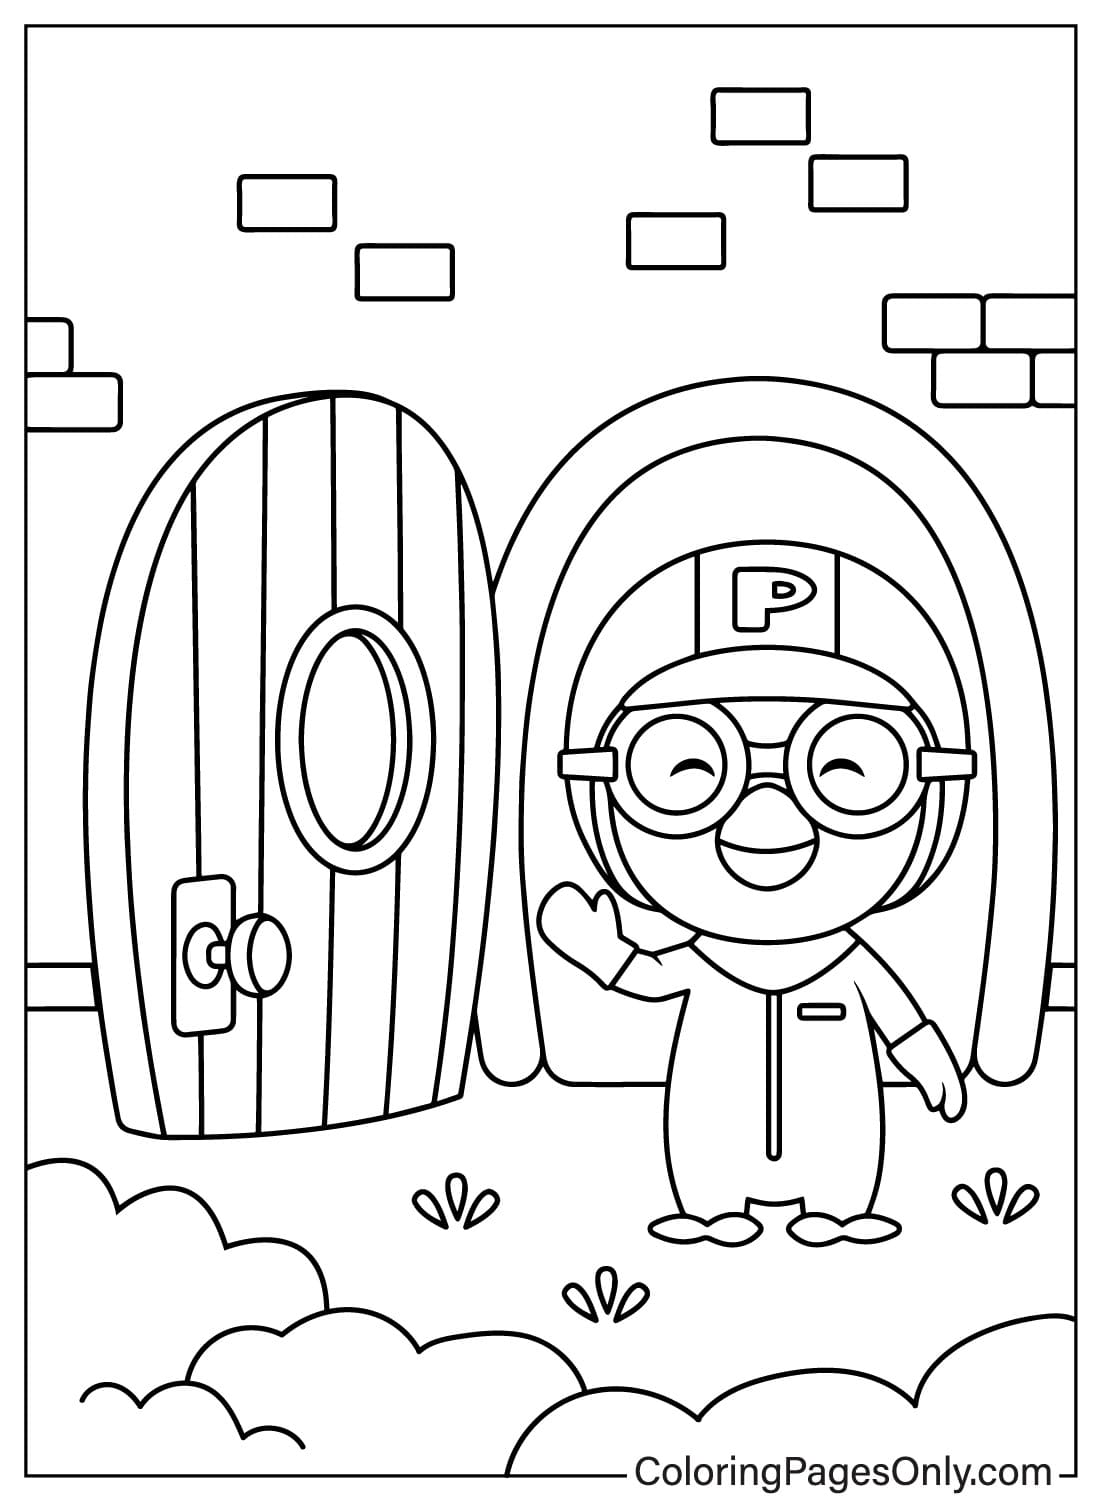 Pororo Free Coloring Page from Pororo the Little Penguin